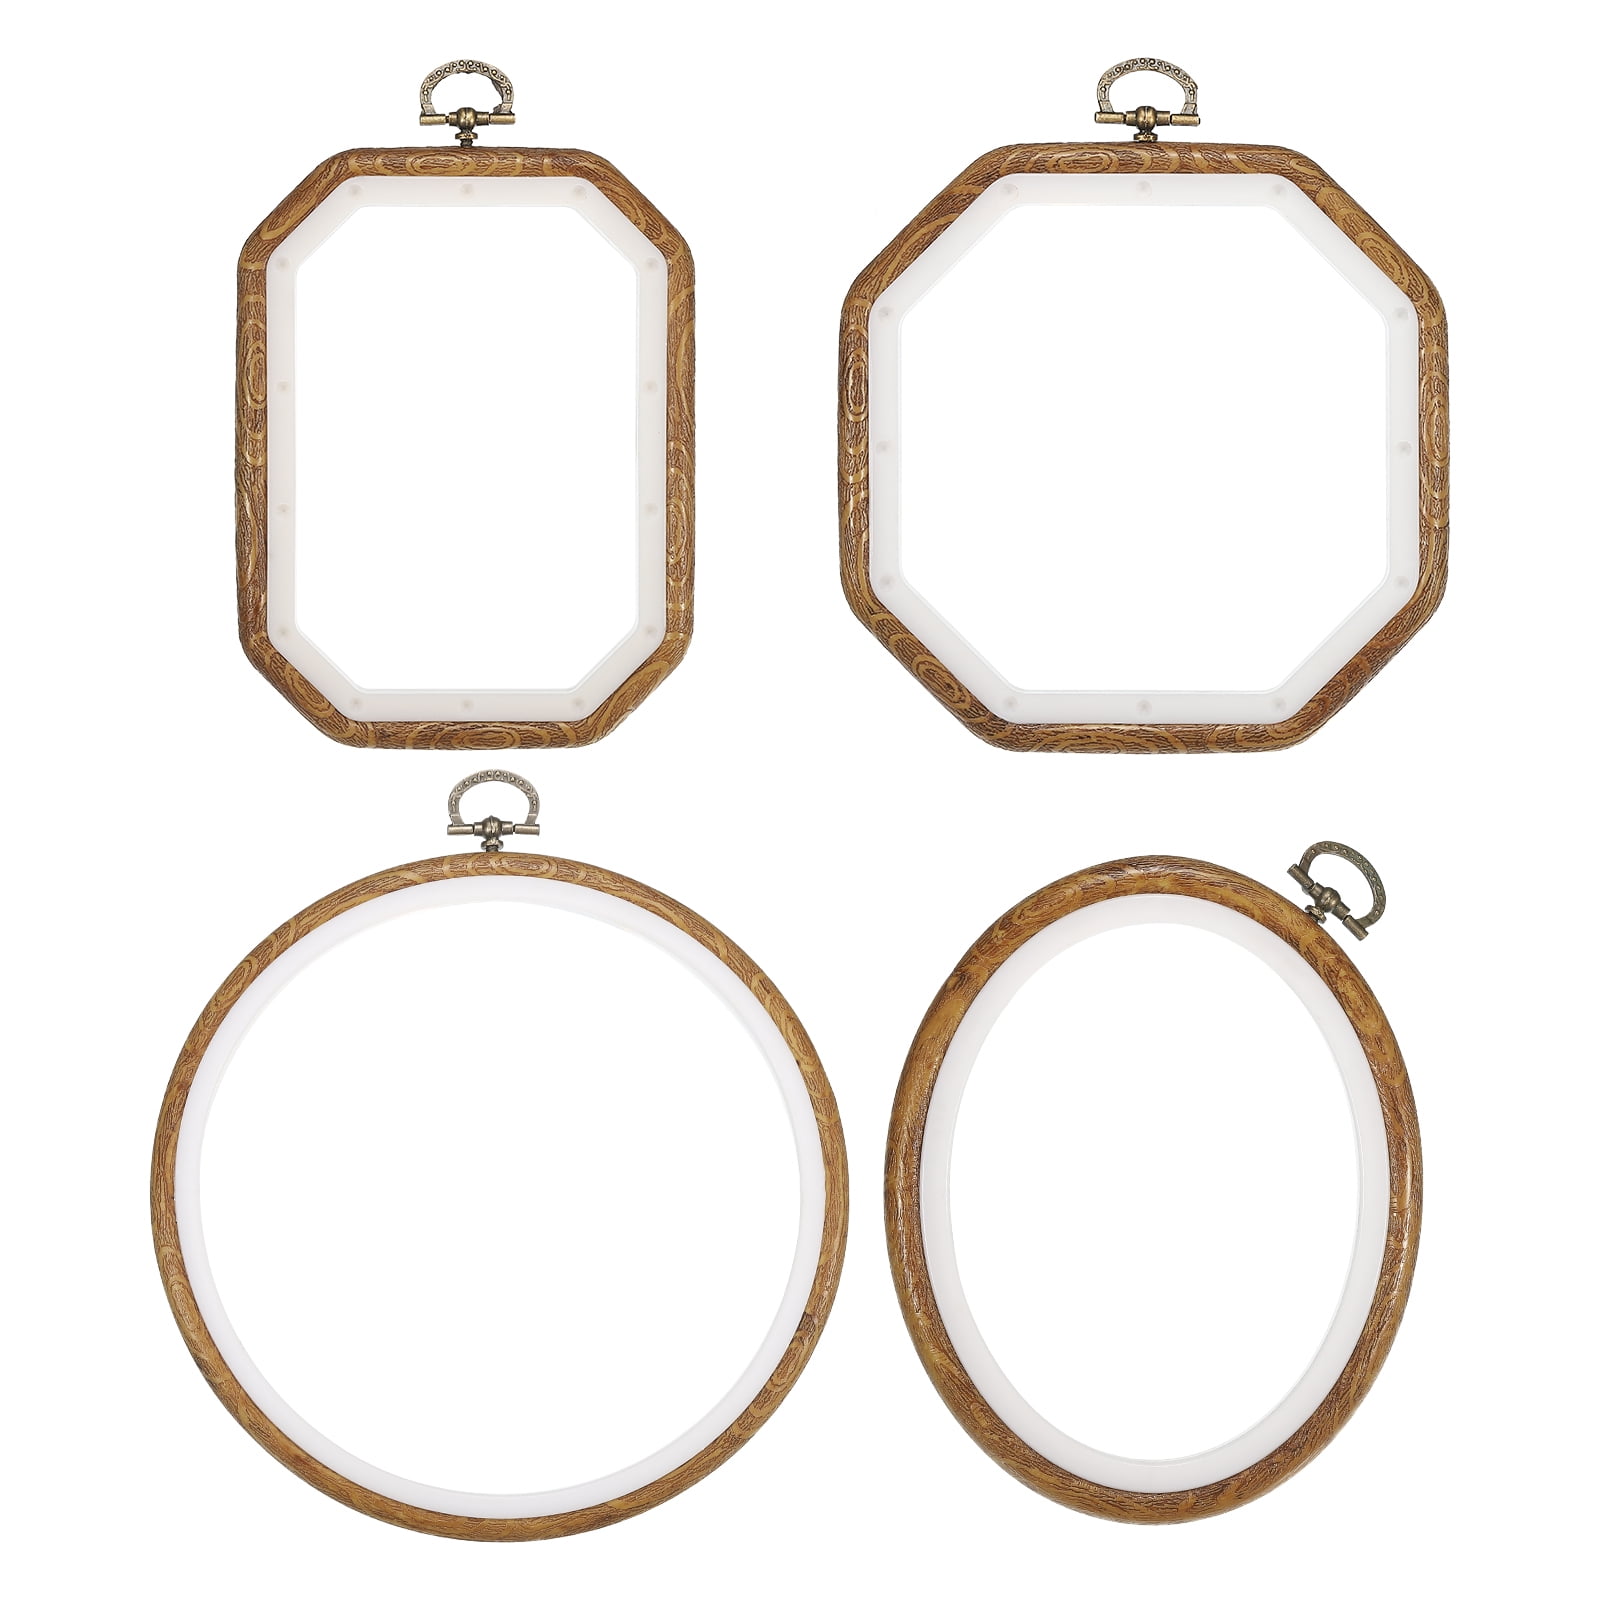 Uxcell 9x6 Wood Color Rubber Oval Embroidery Hoop Frame Cross-Stitch Art  Craft Ring 